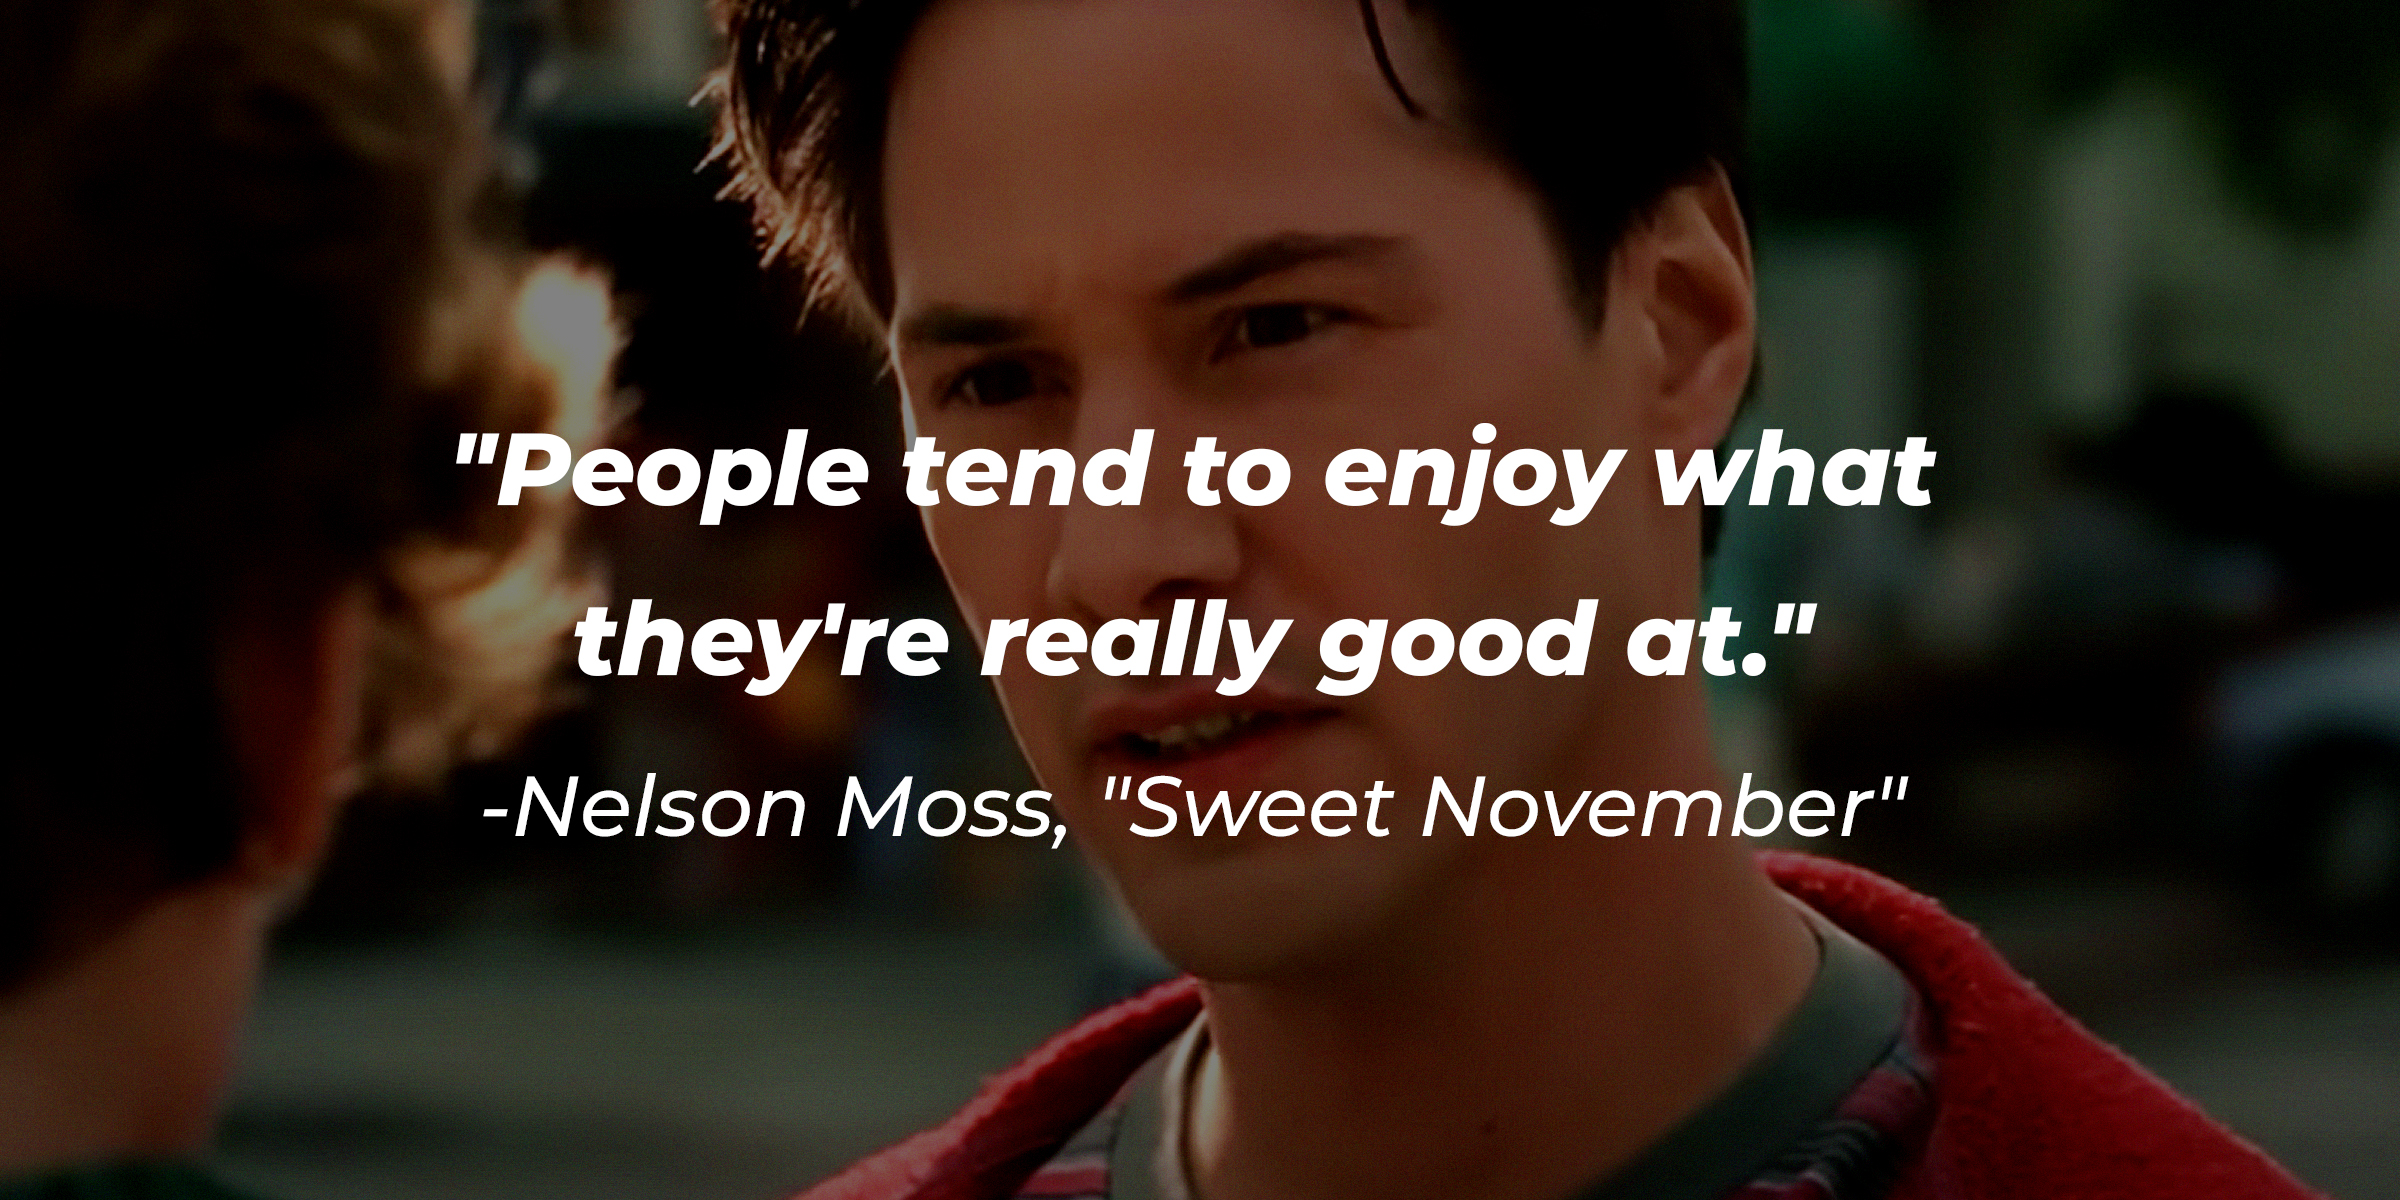 Nelson Moss' quote: "People tend to enjoy what they're really good at." | Source: Youtube.com/WarnerBrosPictures